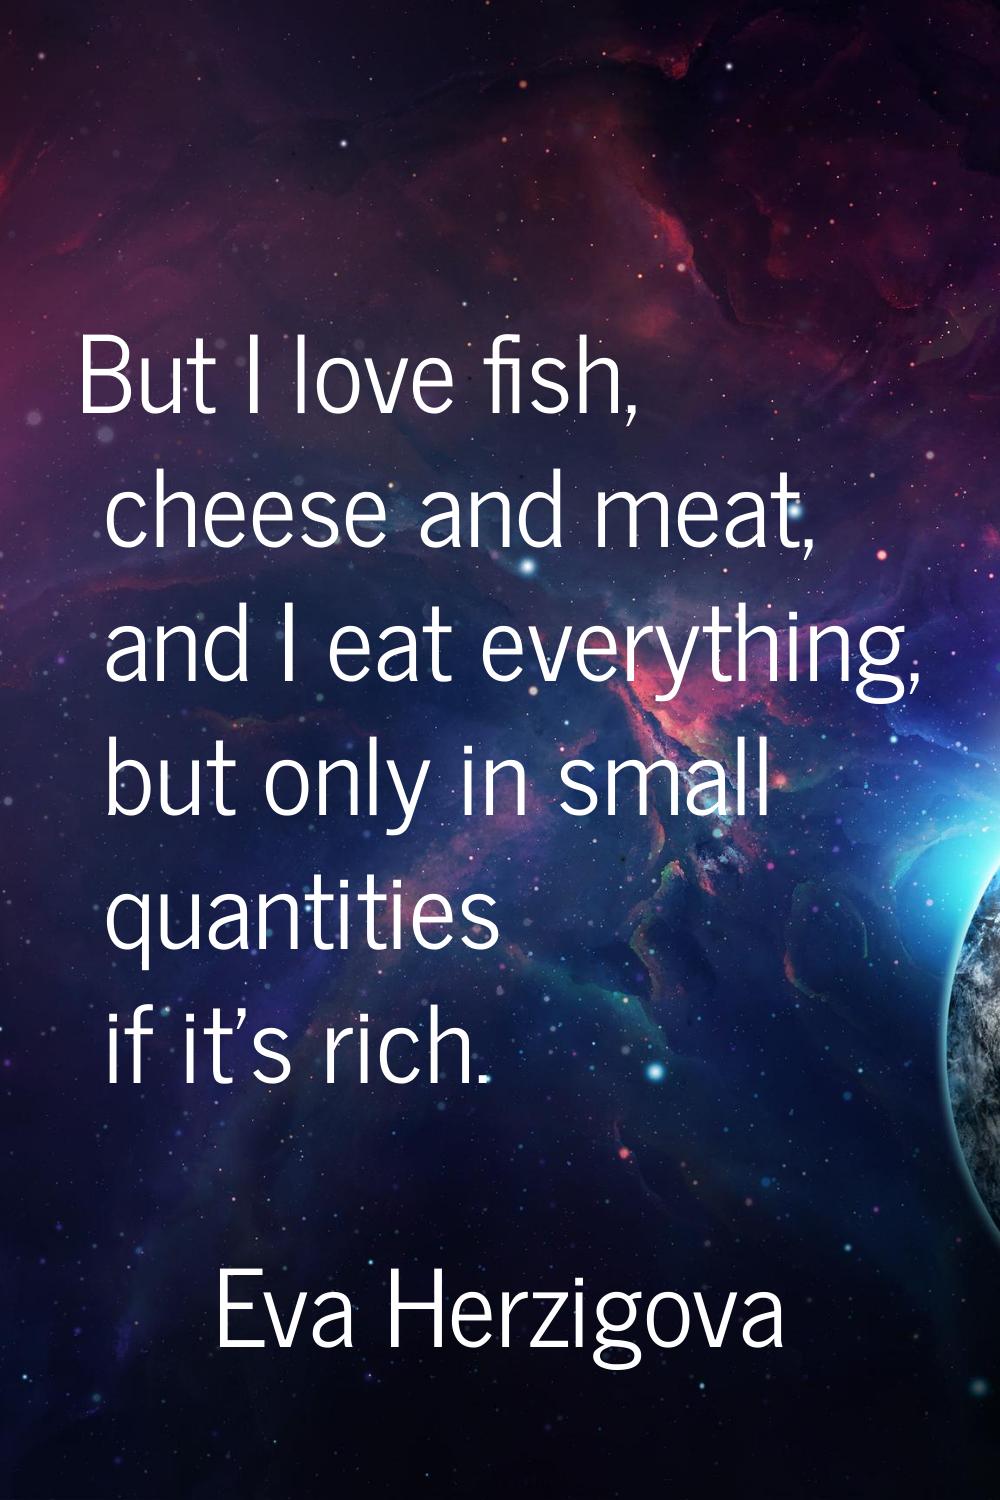 But I love fish, cheese and meat, and I eat everything, but only in small quantities if it's rich.